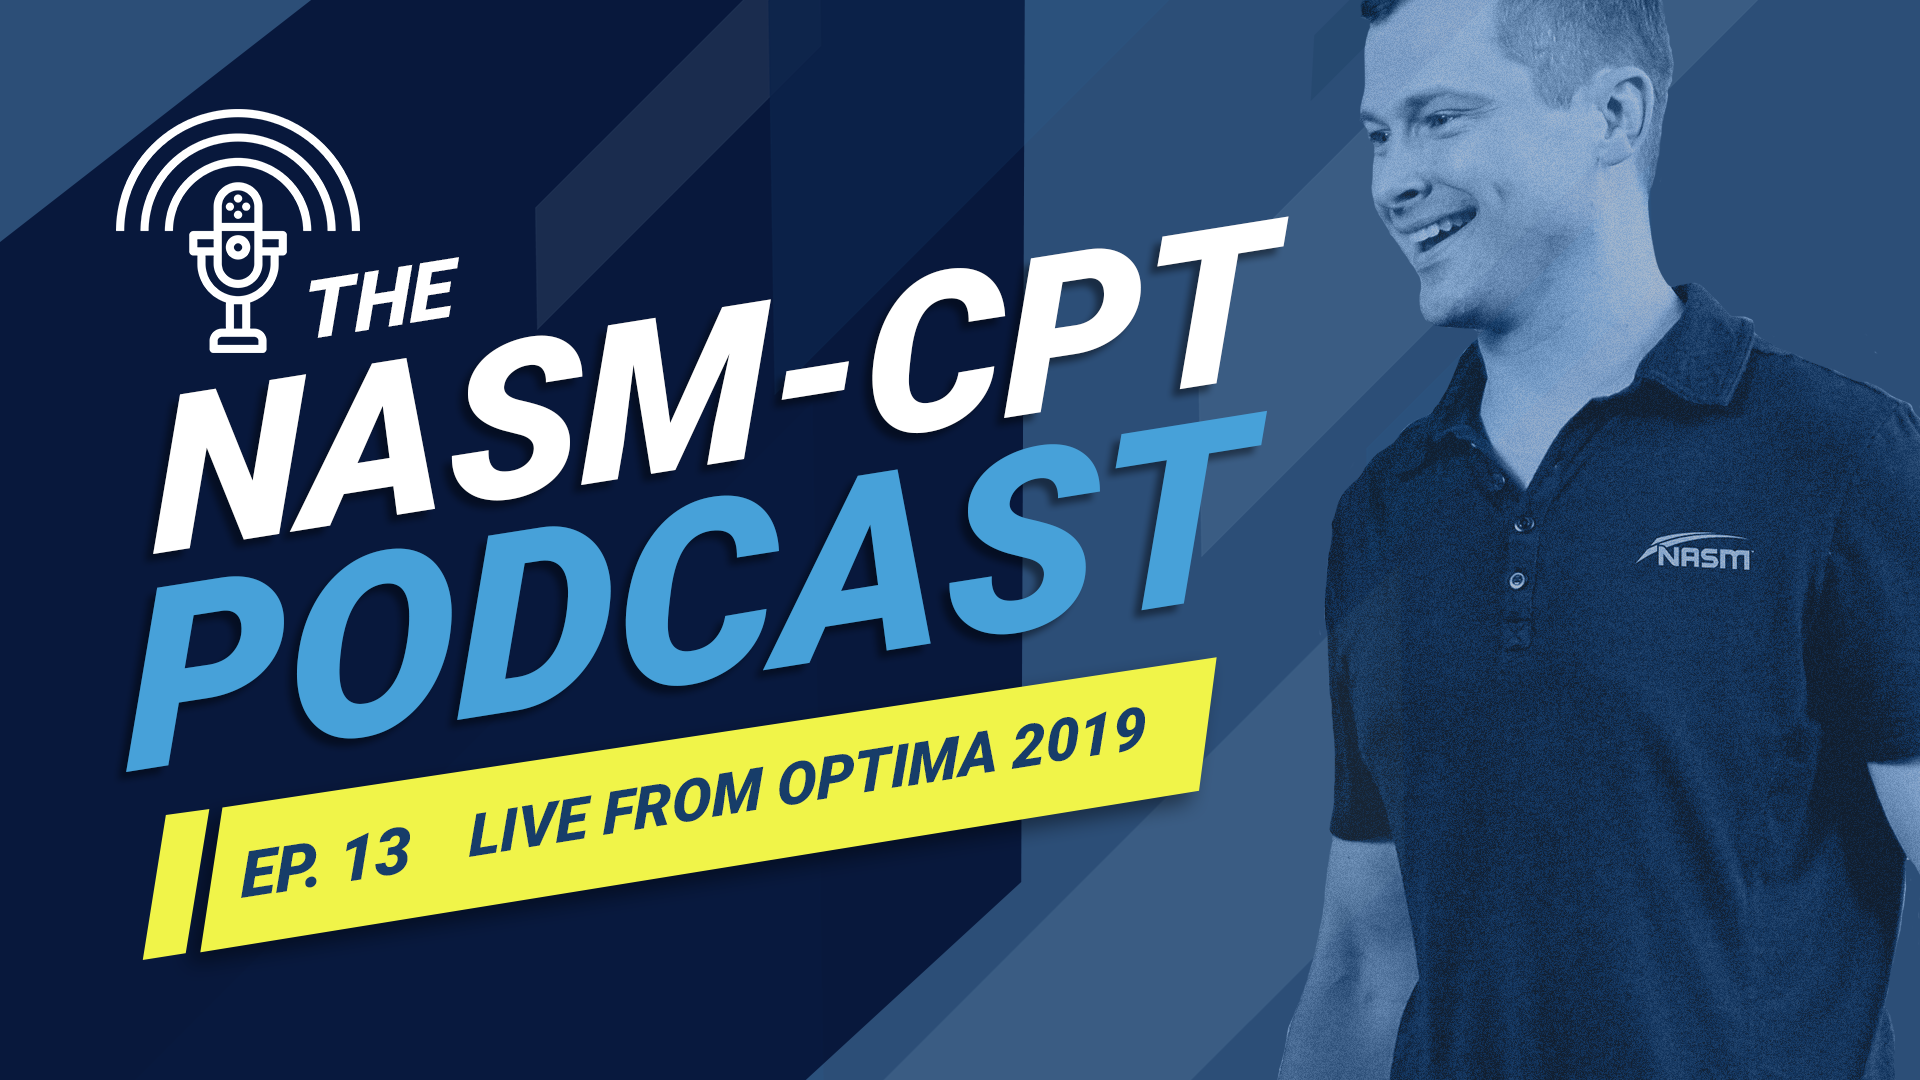 The Kur-Apotheke-Badherrenalb-CPT Podcast: Live from Optima 2019 Conference